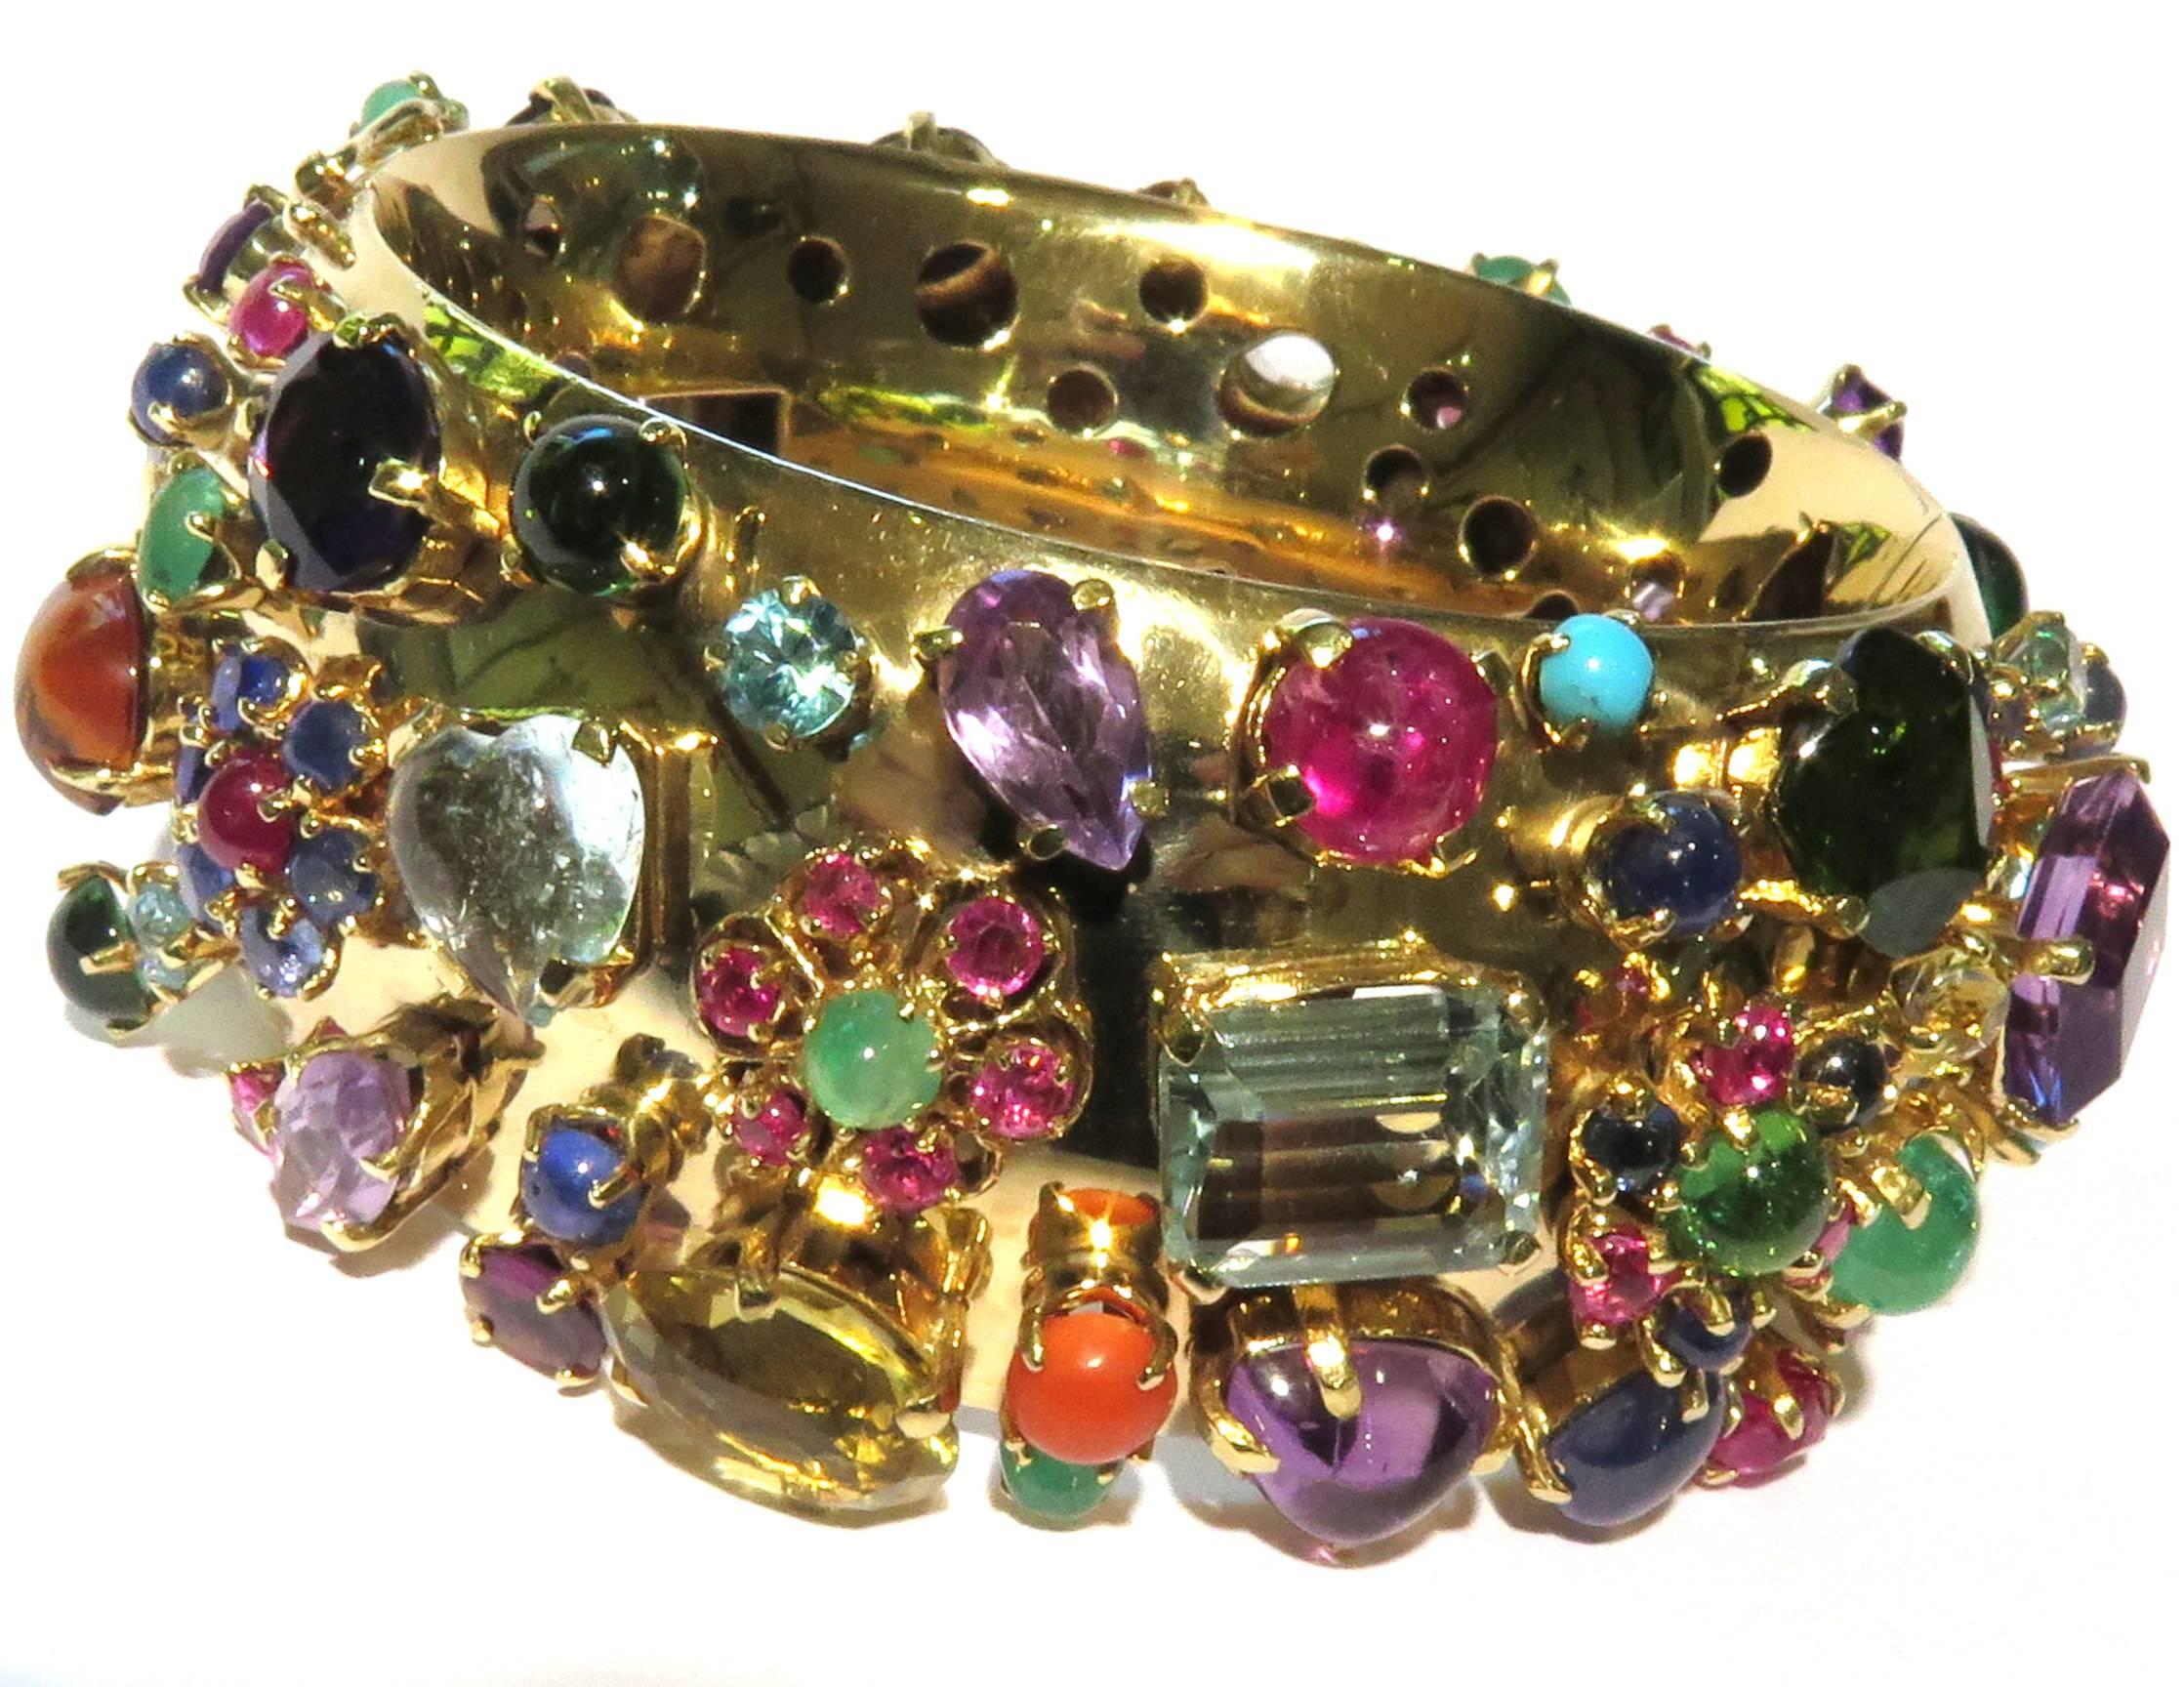 This unique 1 of a kind  bracelet has almost every precious stone in the world. Both sides are fully covered in amethysts aquamarines, rubies, sapphires, coral, tourmalines, emeralds, garnets, citrines, turquoise, etcetera in every cut & shape, all